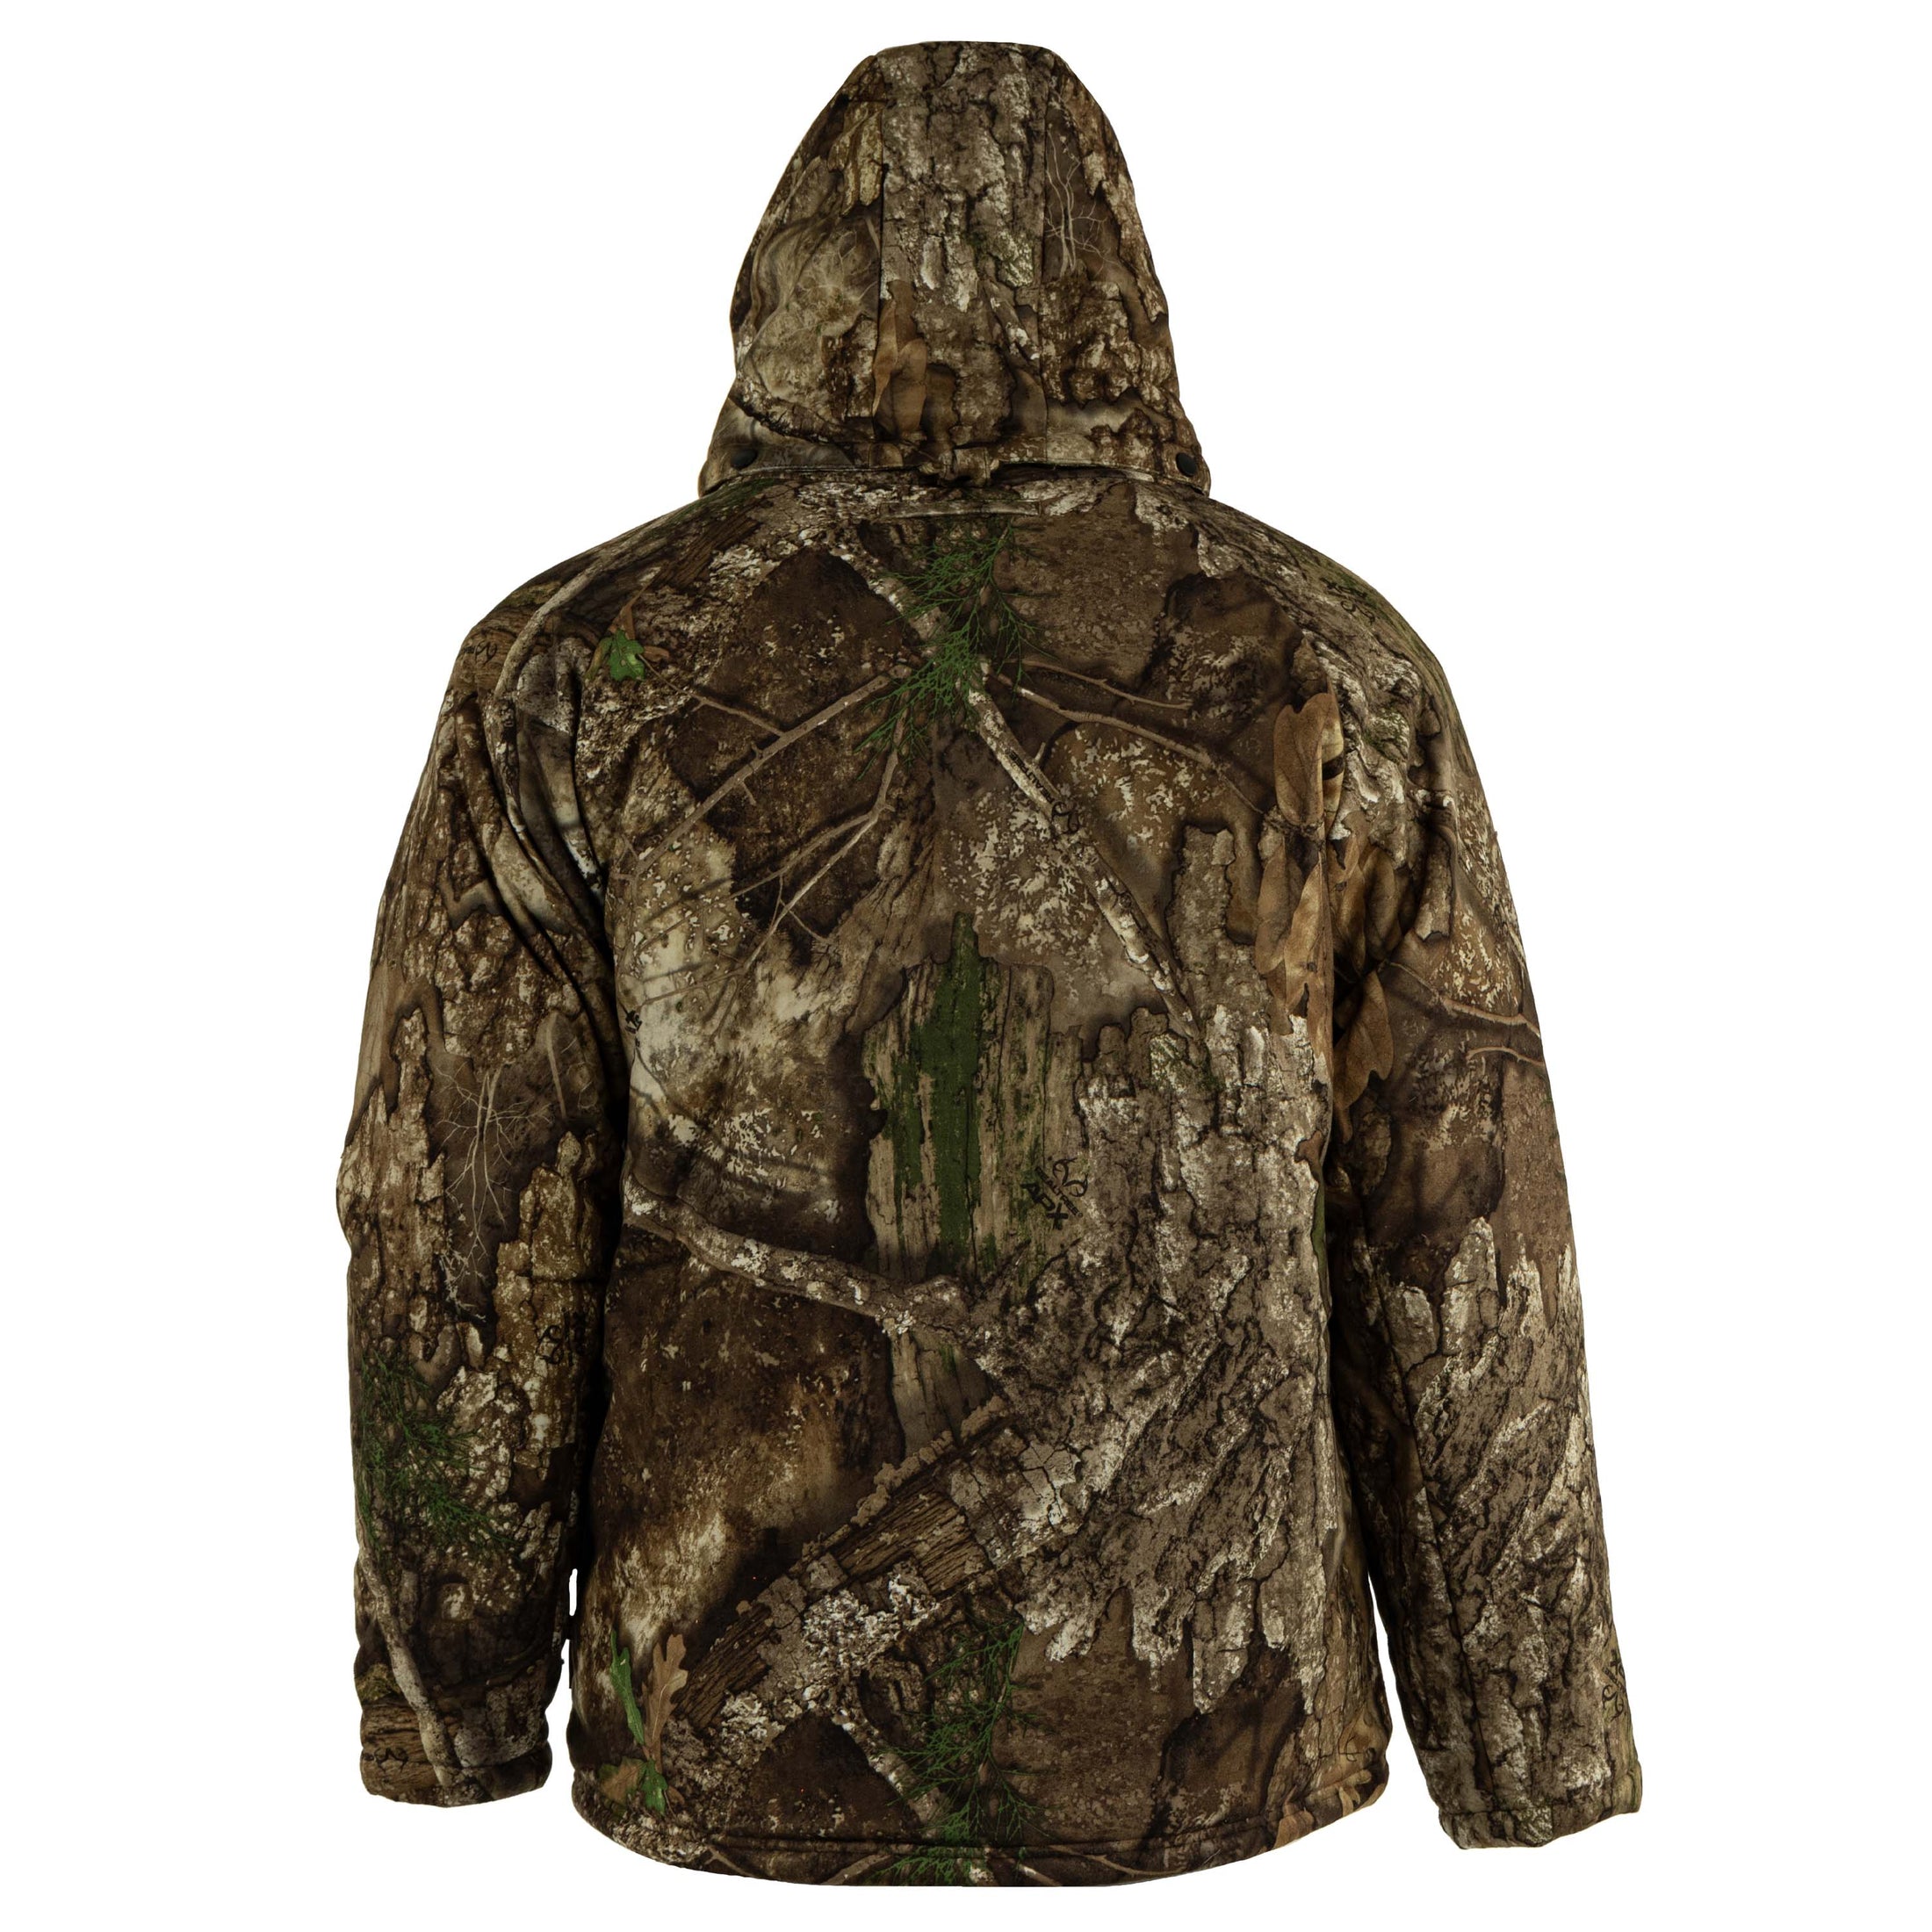 Embers Edge parka - back view (realtree apx)